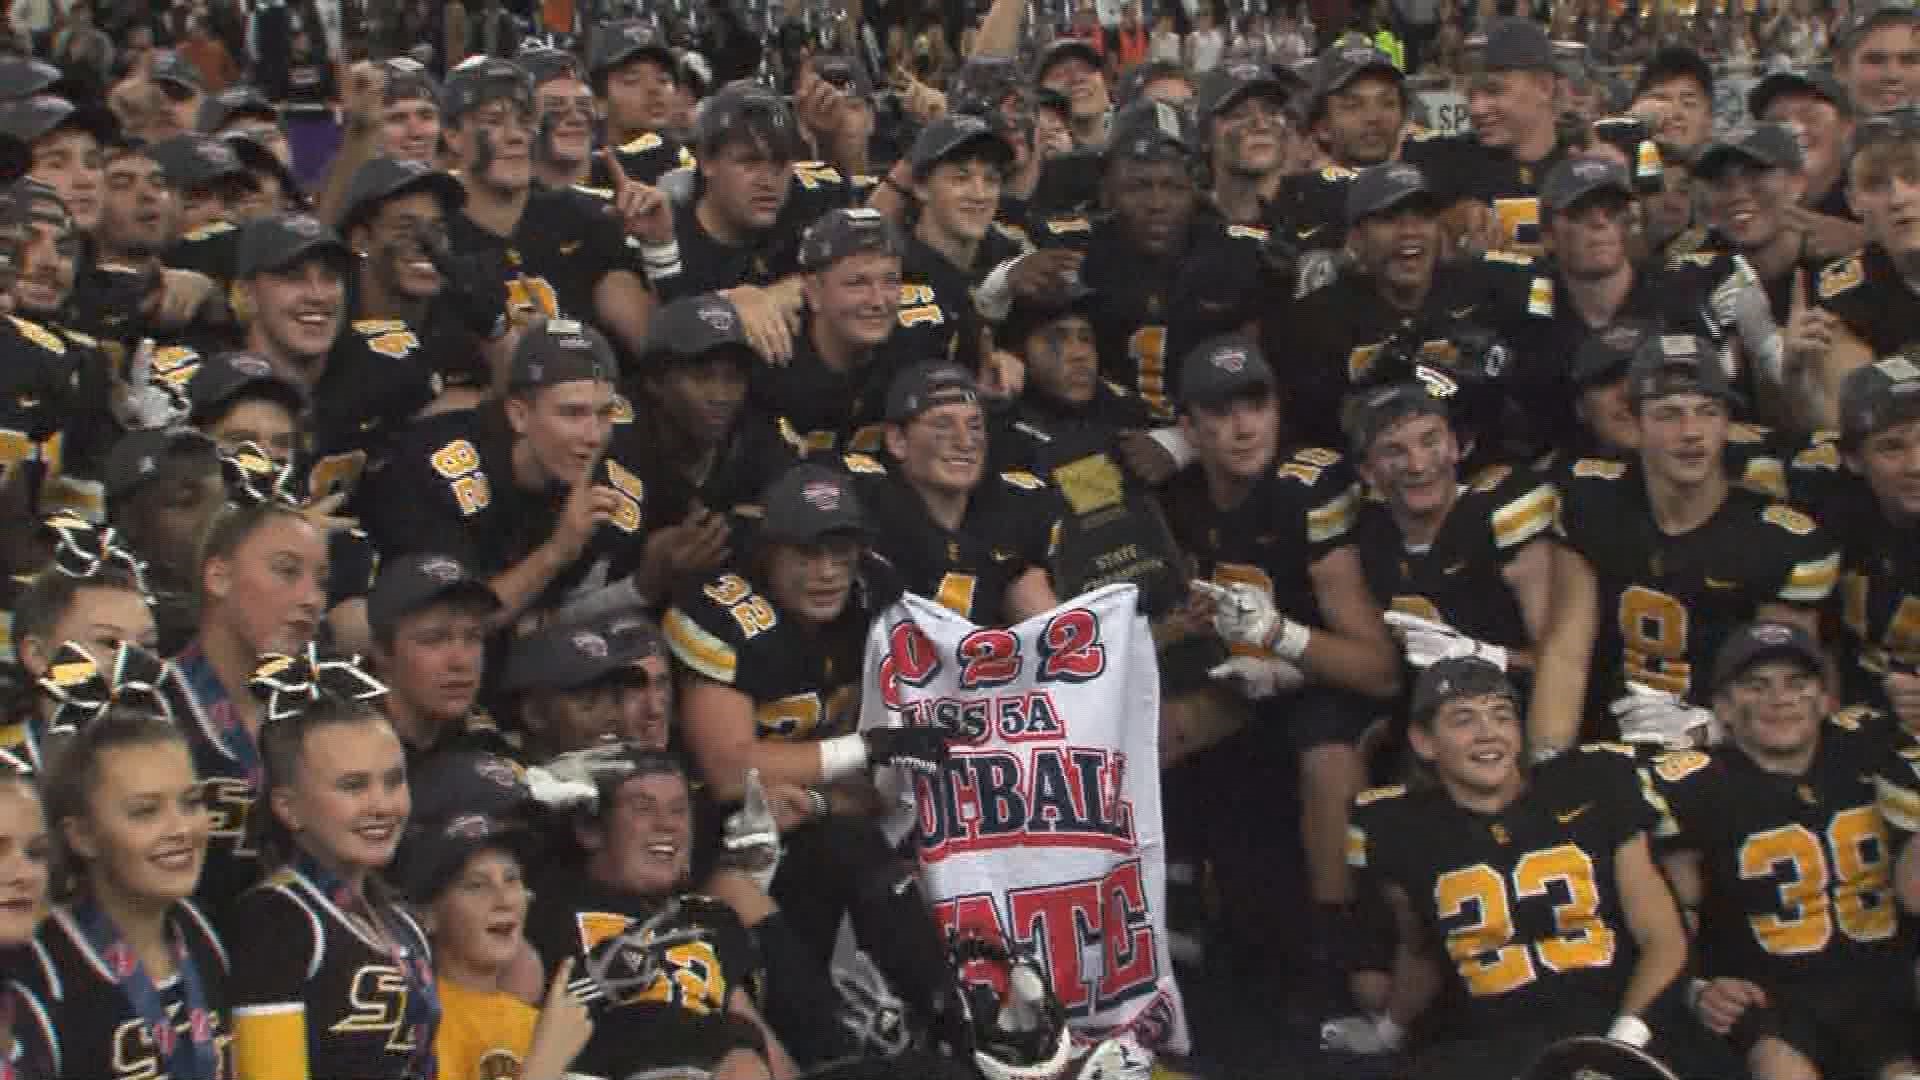 The Rams secured a repeat Class 5A state title by taking down Valley 49-14.